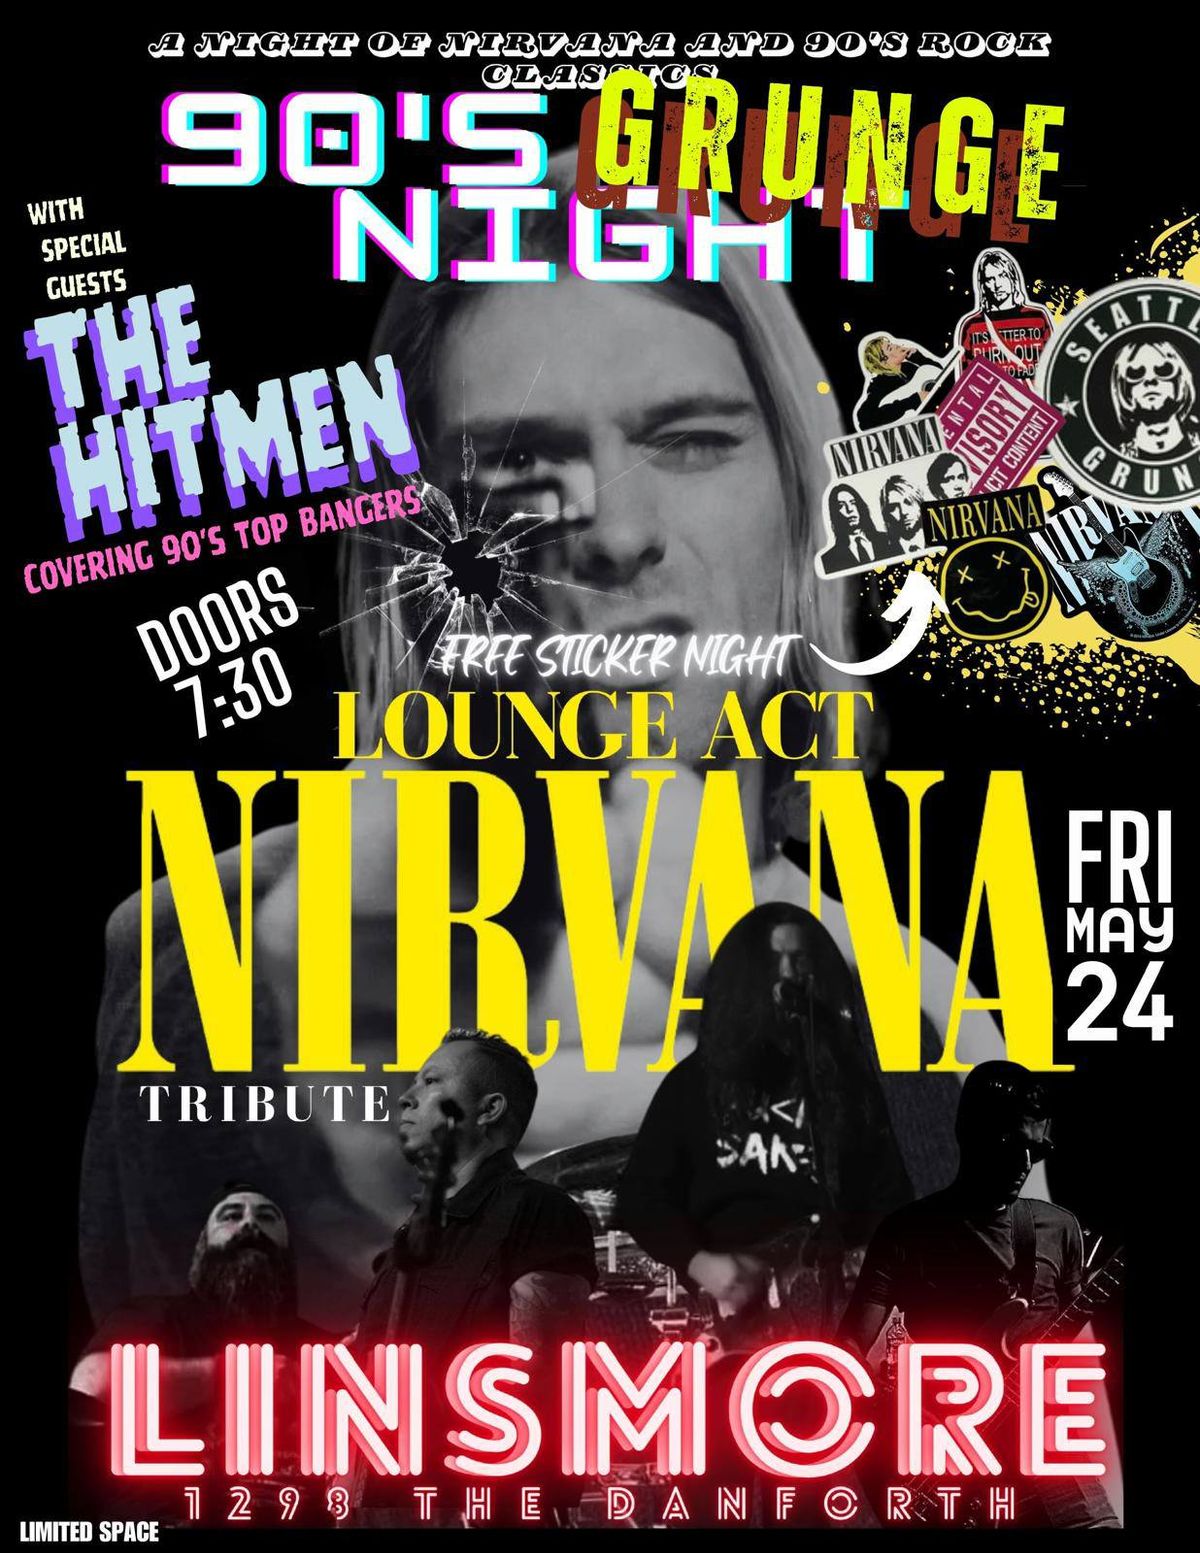  A Nirvana Tribute w Special Guests The Hitmen Covering 90\u2019s Top Bangers, Live @ the Linsmore Tavern